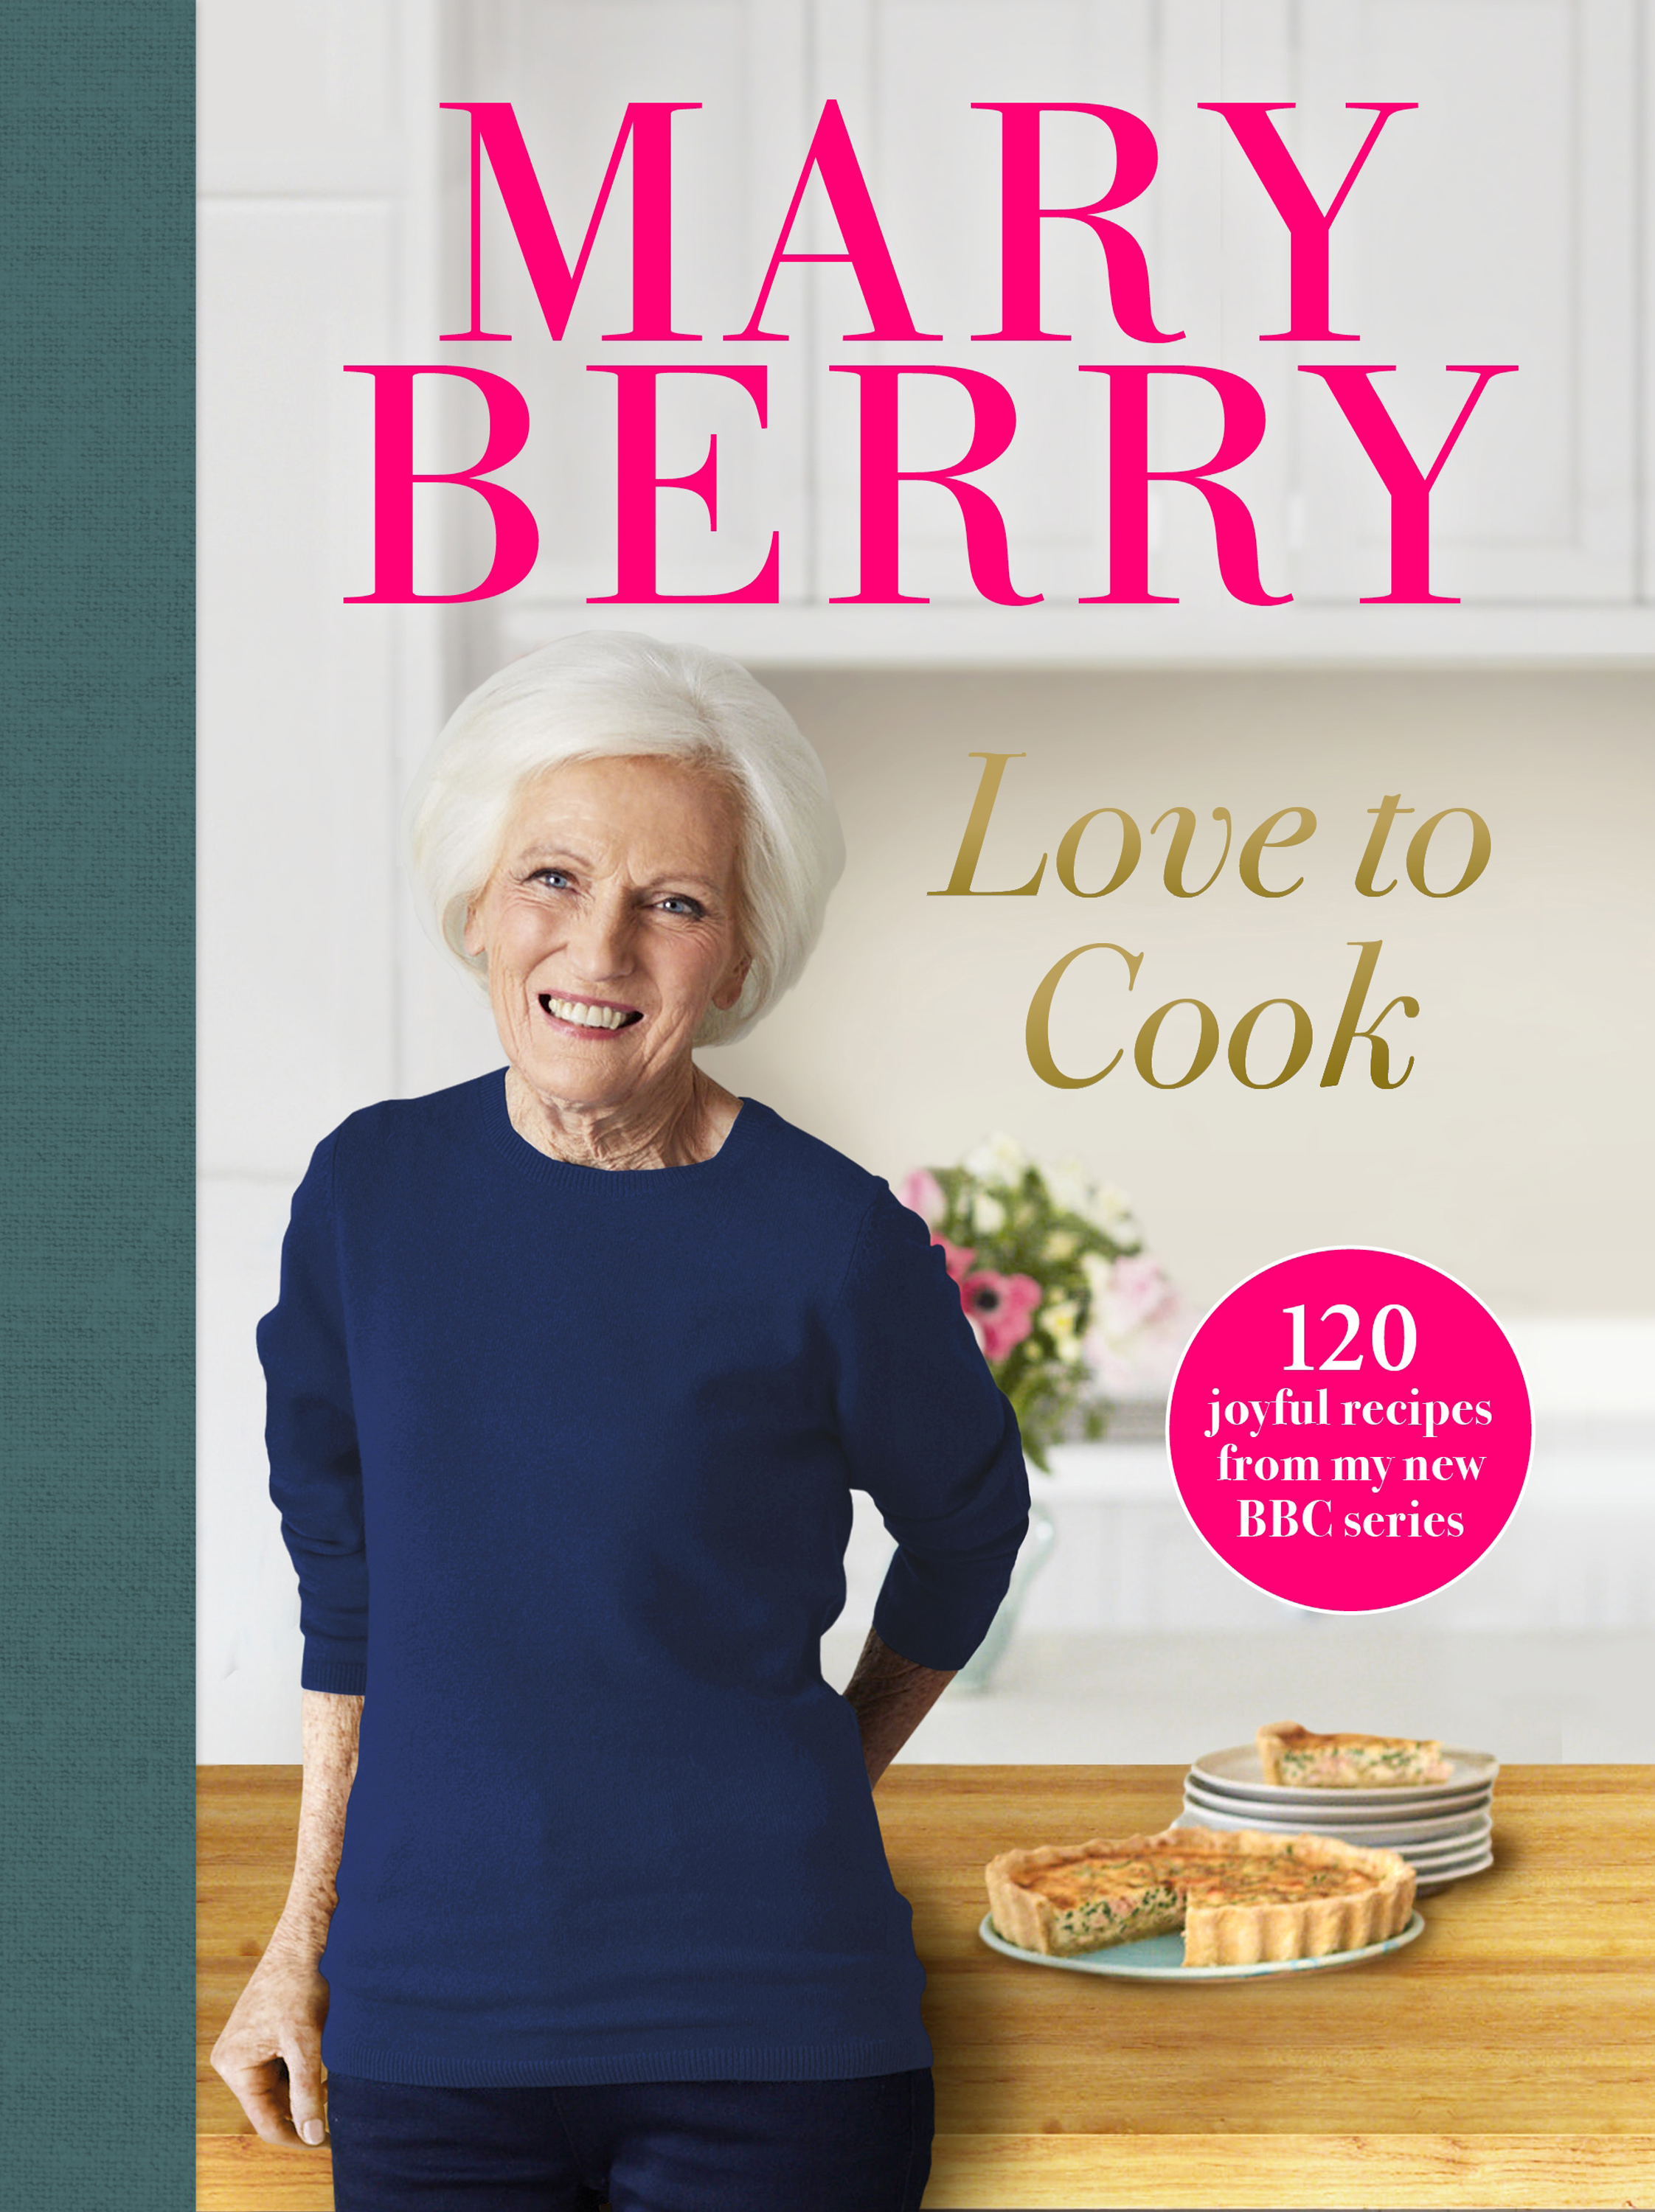 Love To Cook by Mary Berry (Laura Edwards/PA)